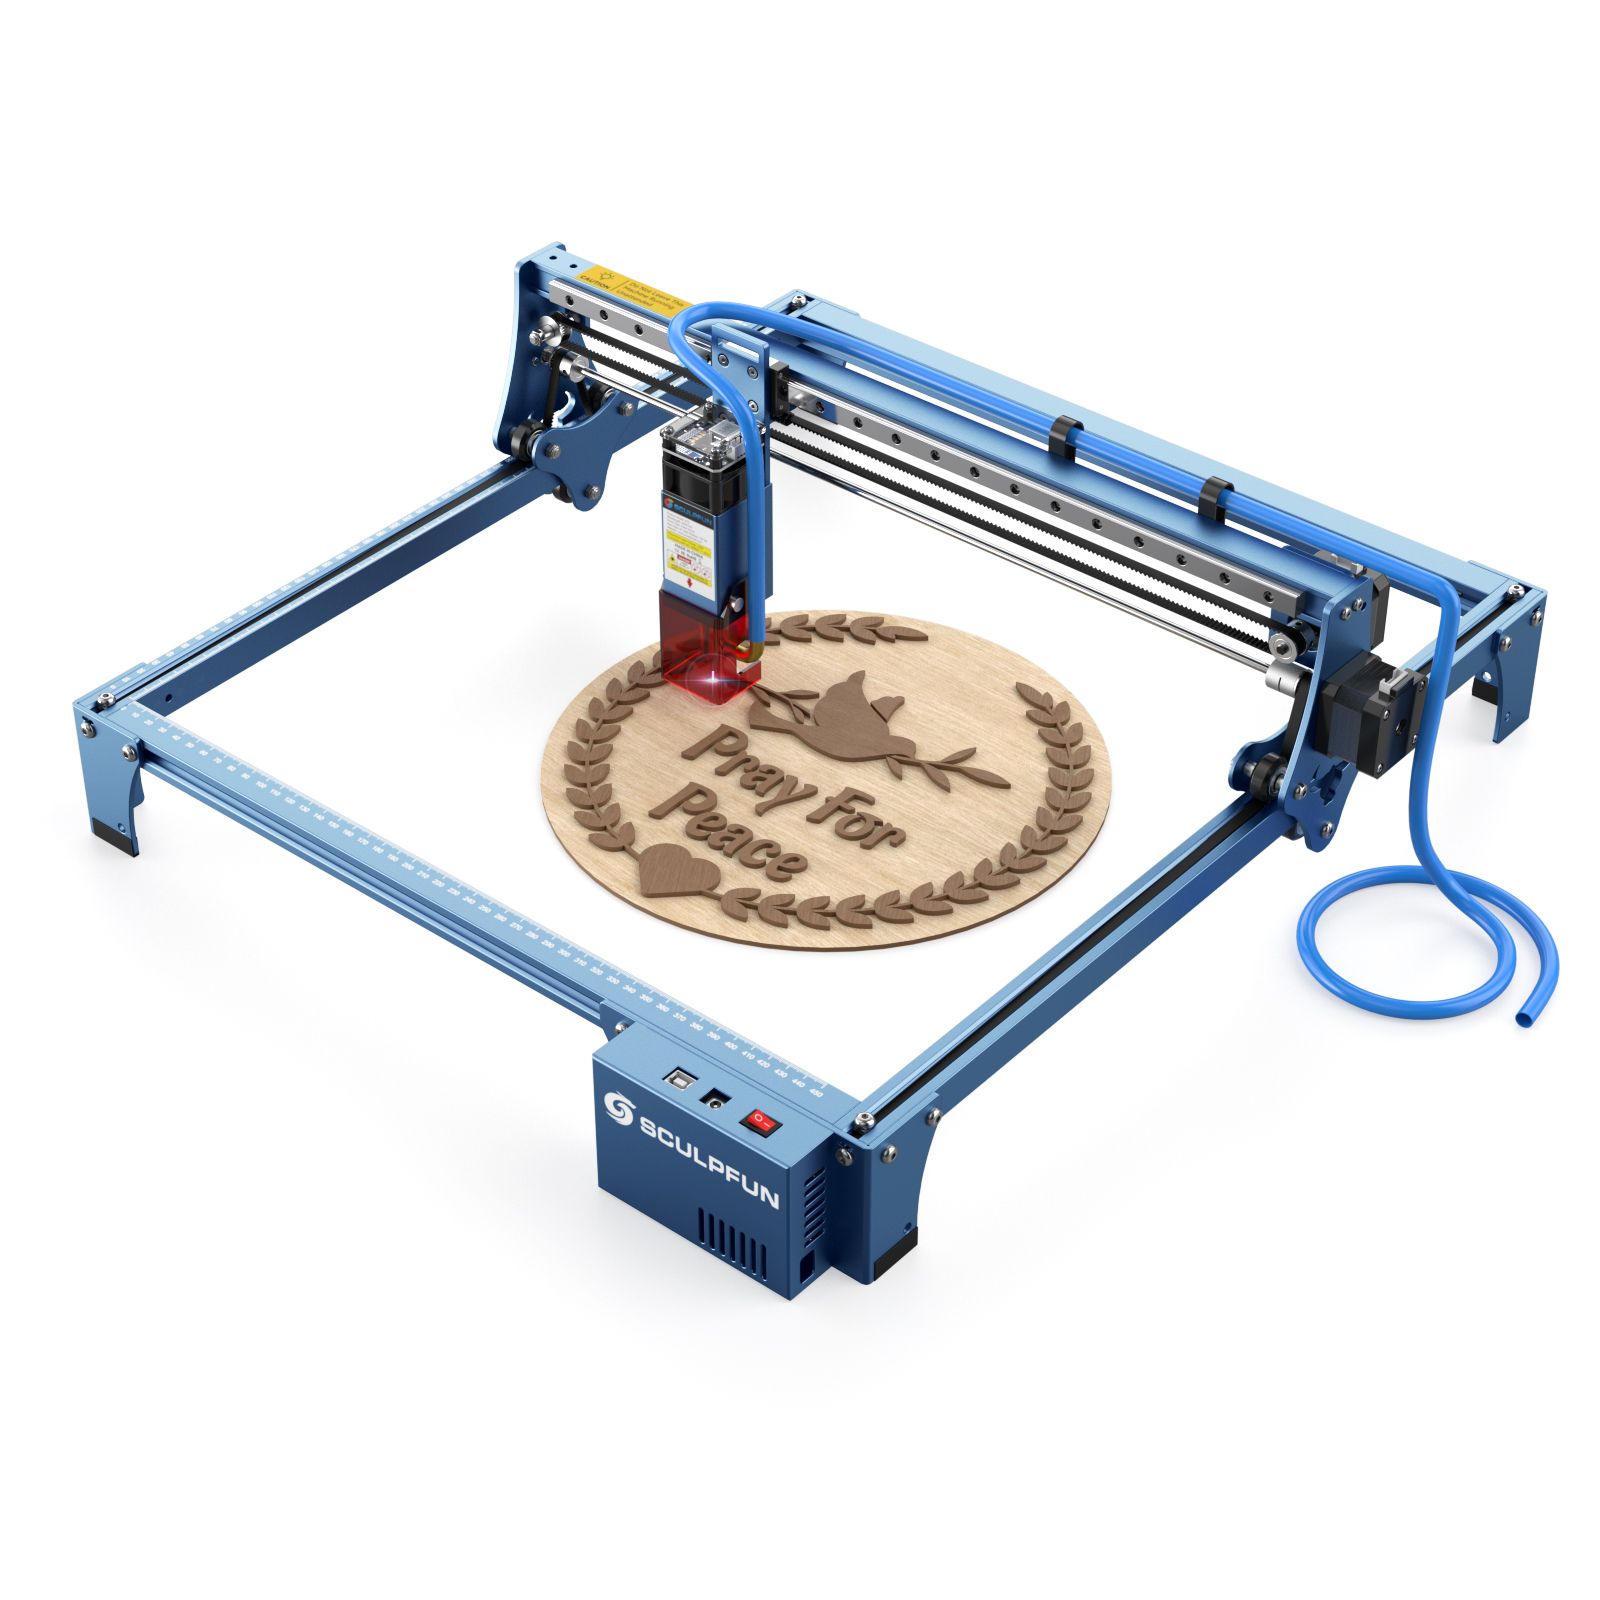 Find SCULPFUN S10 10W Laser Engraving Machine Laser Engraver Cutter 0 08mm High Precision Air Assist 32Bit Motherboard Upgraded Linear Rail Slide Full Metal CNC Engraving Area 410 400mm for Sale on Gipsybee.com with cryptocurrencies